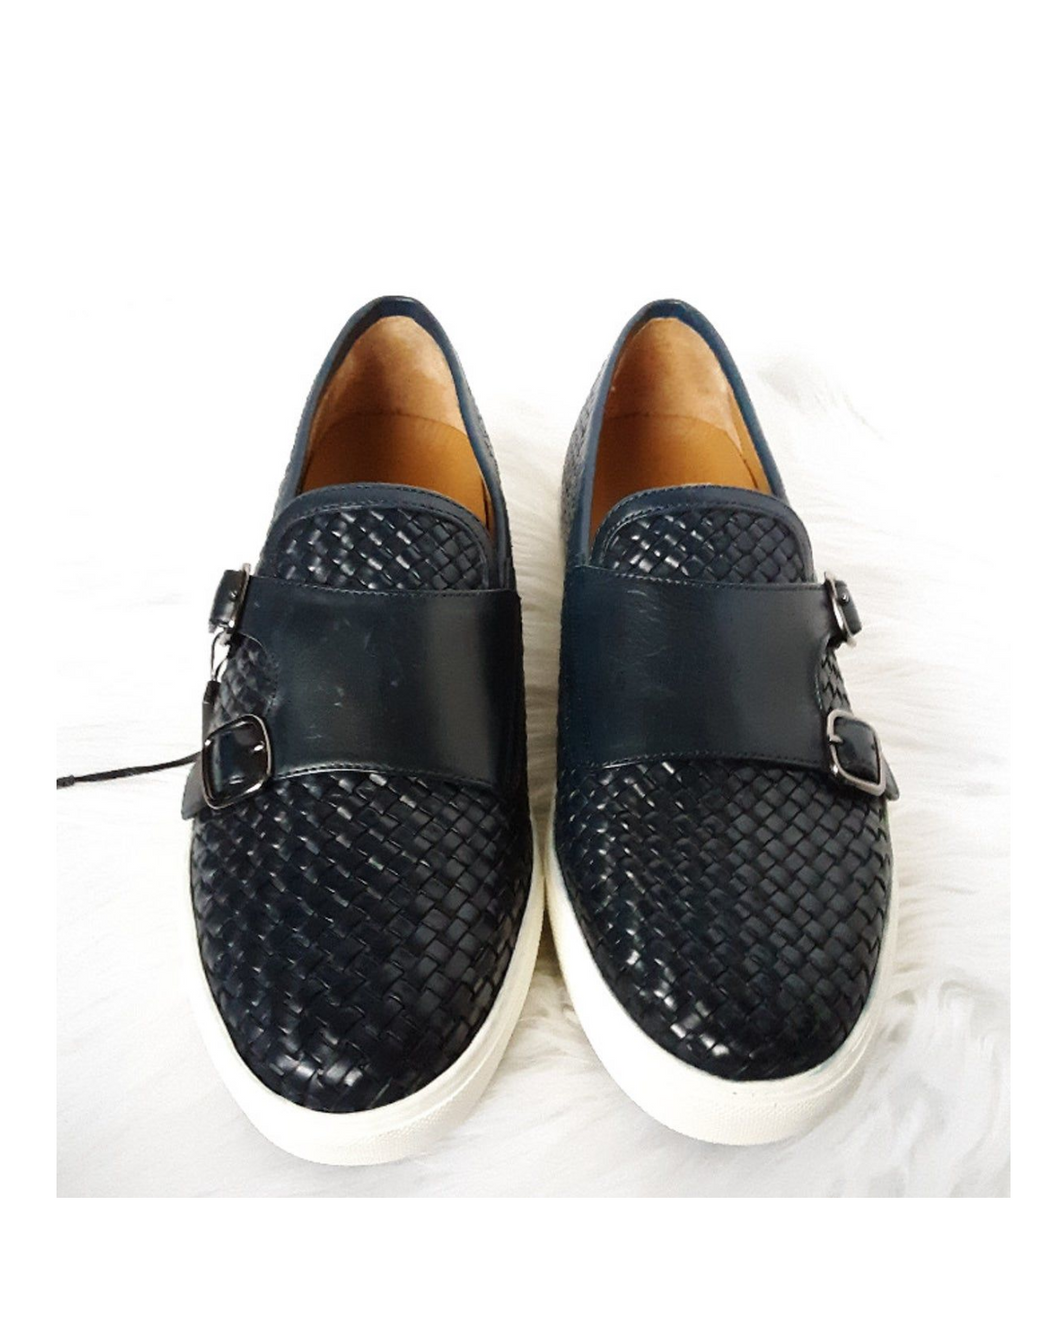 Netted Governors Plimsolls Sneakers Monk Strap